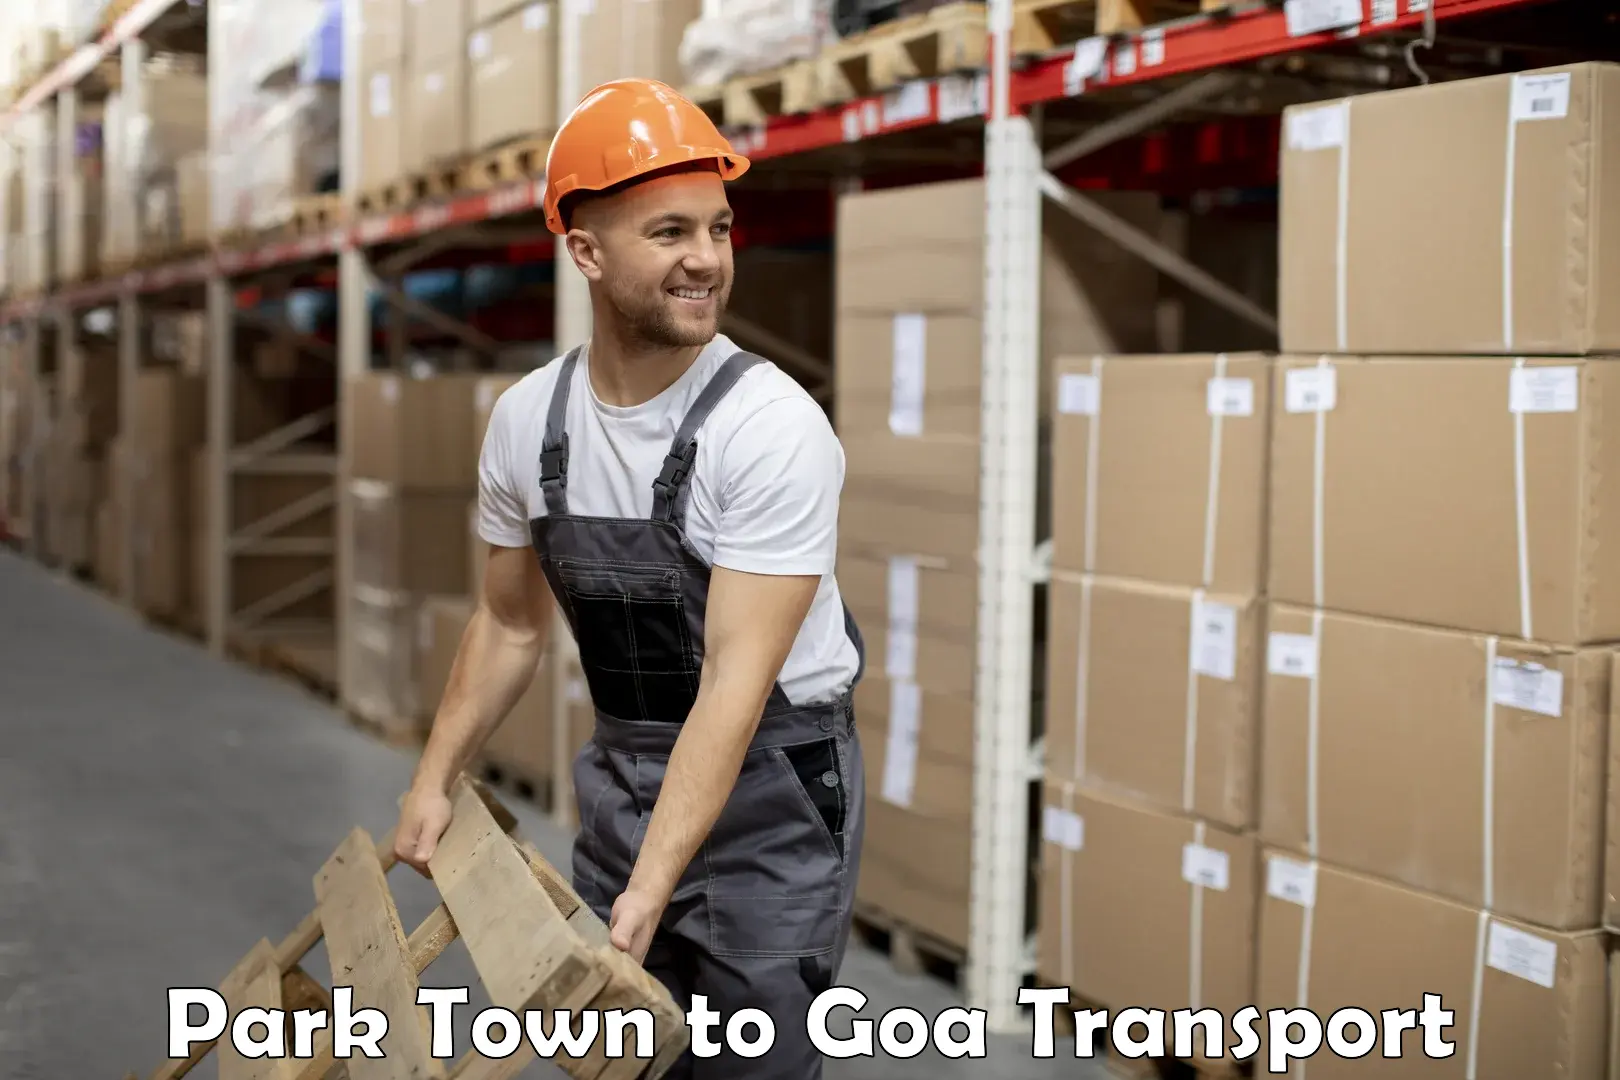 Bike transport service Park Town to South Goa